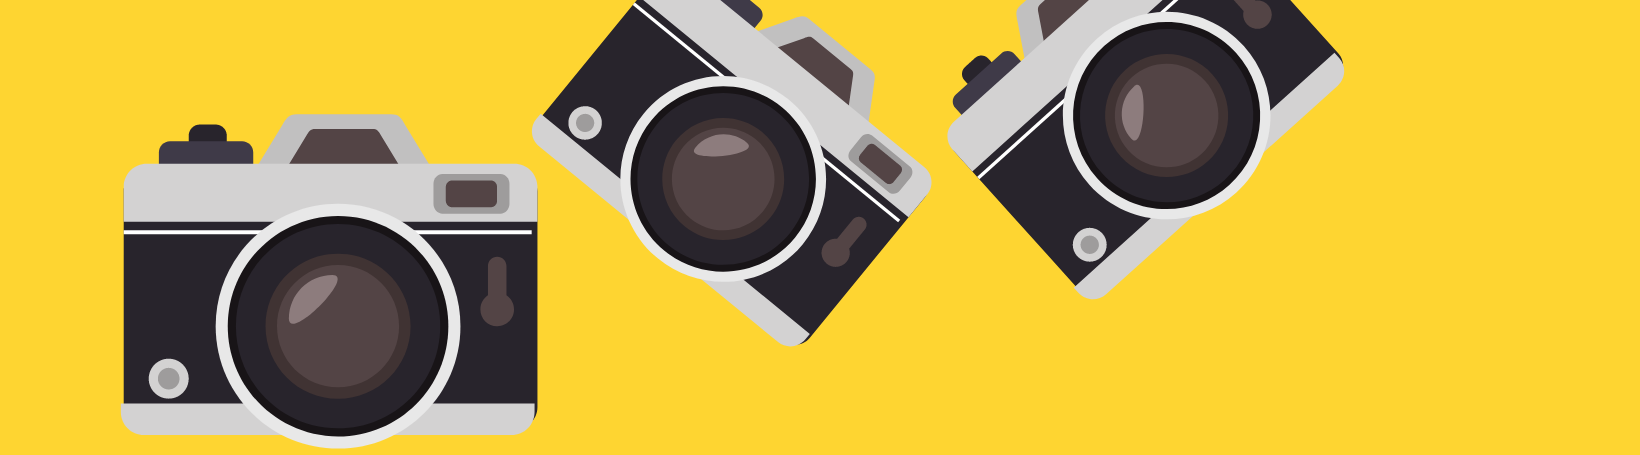 3 Cameras with yellow background